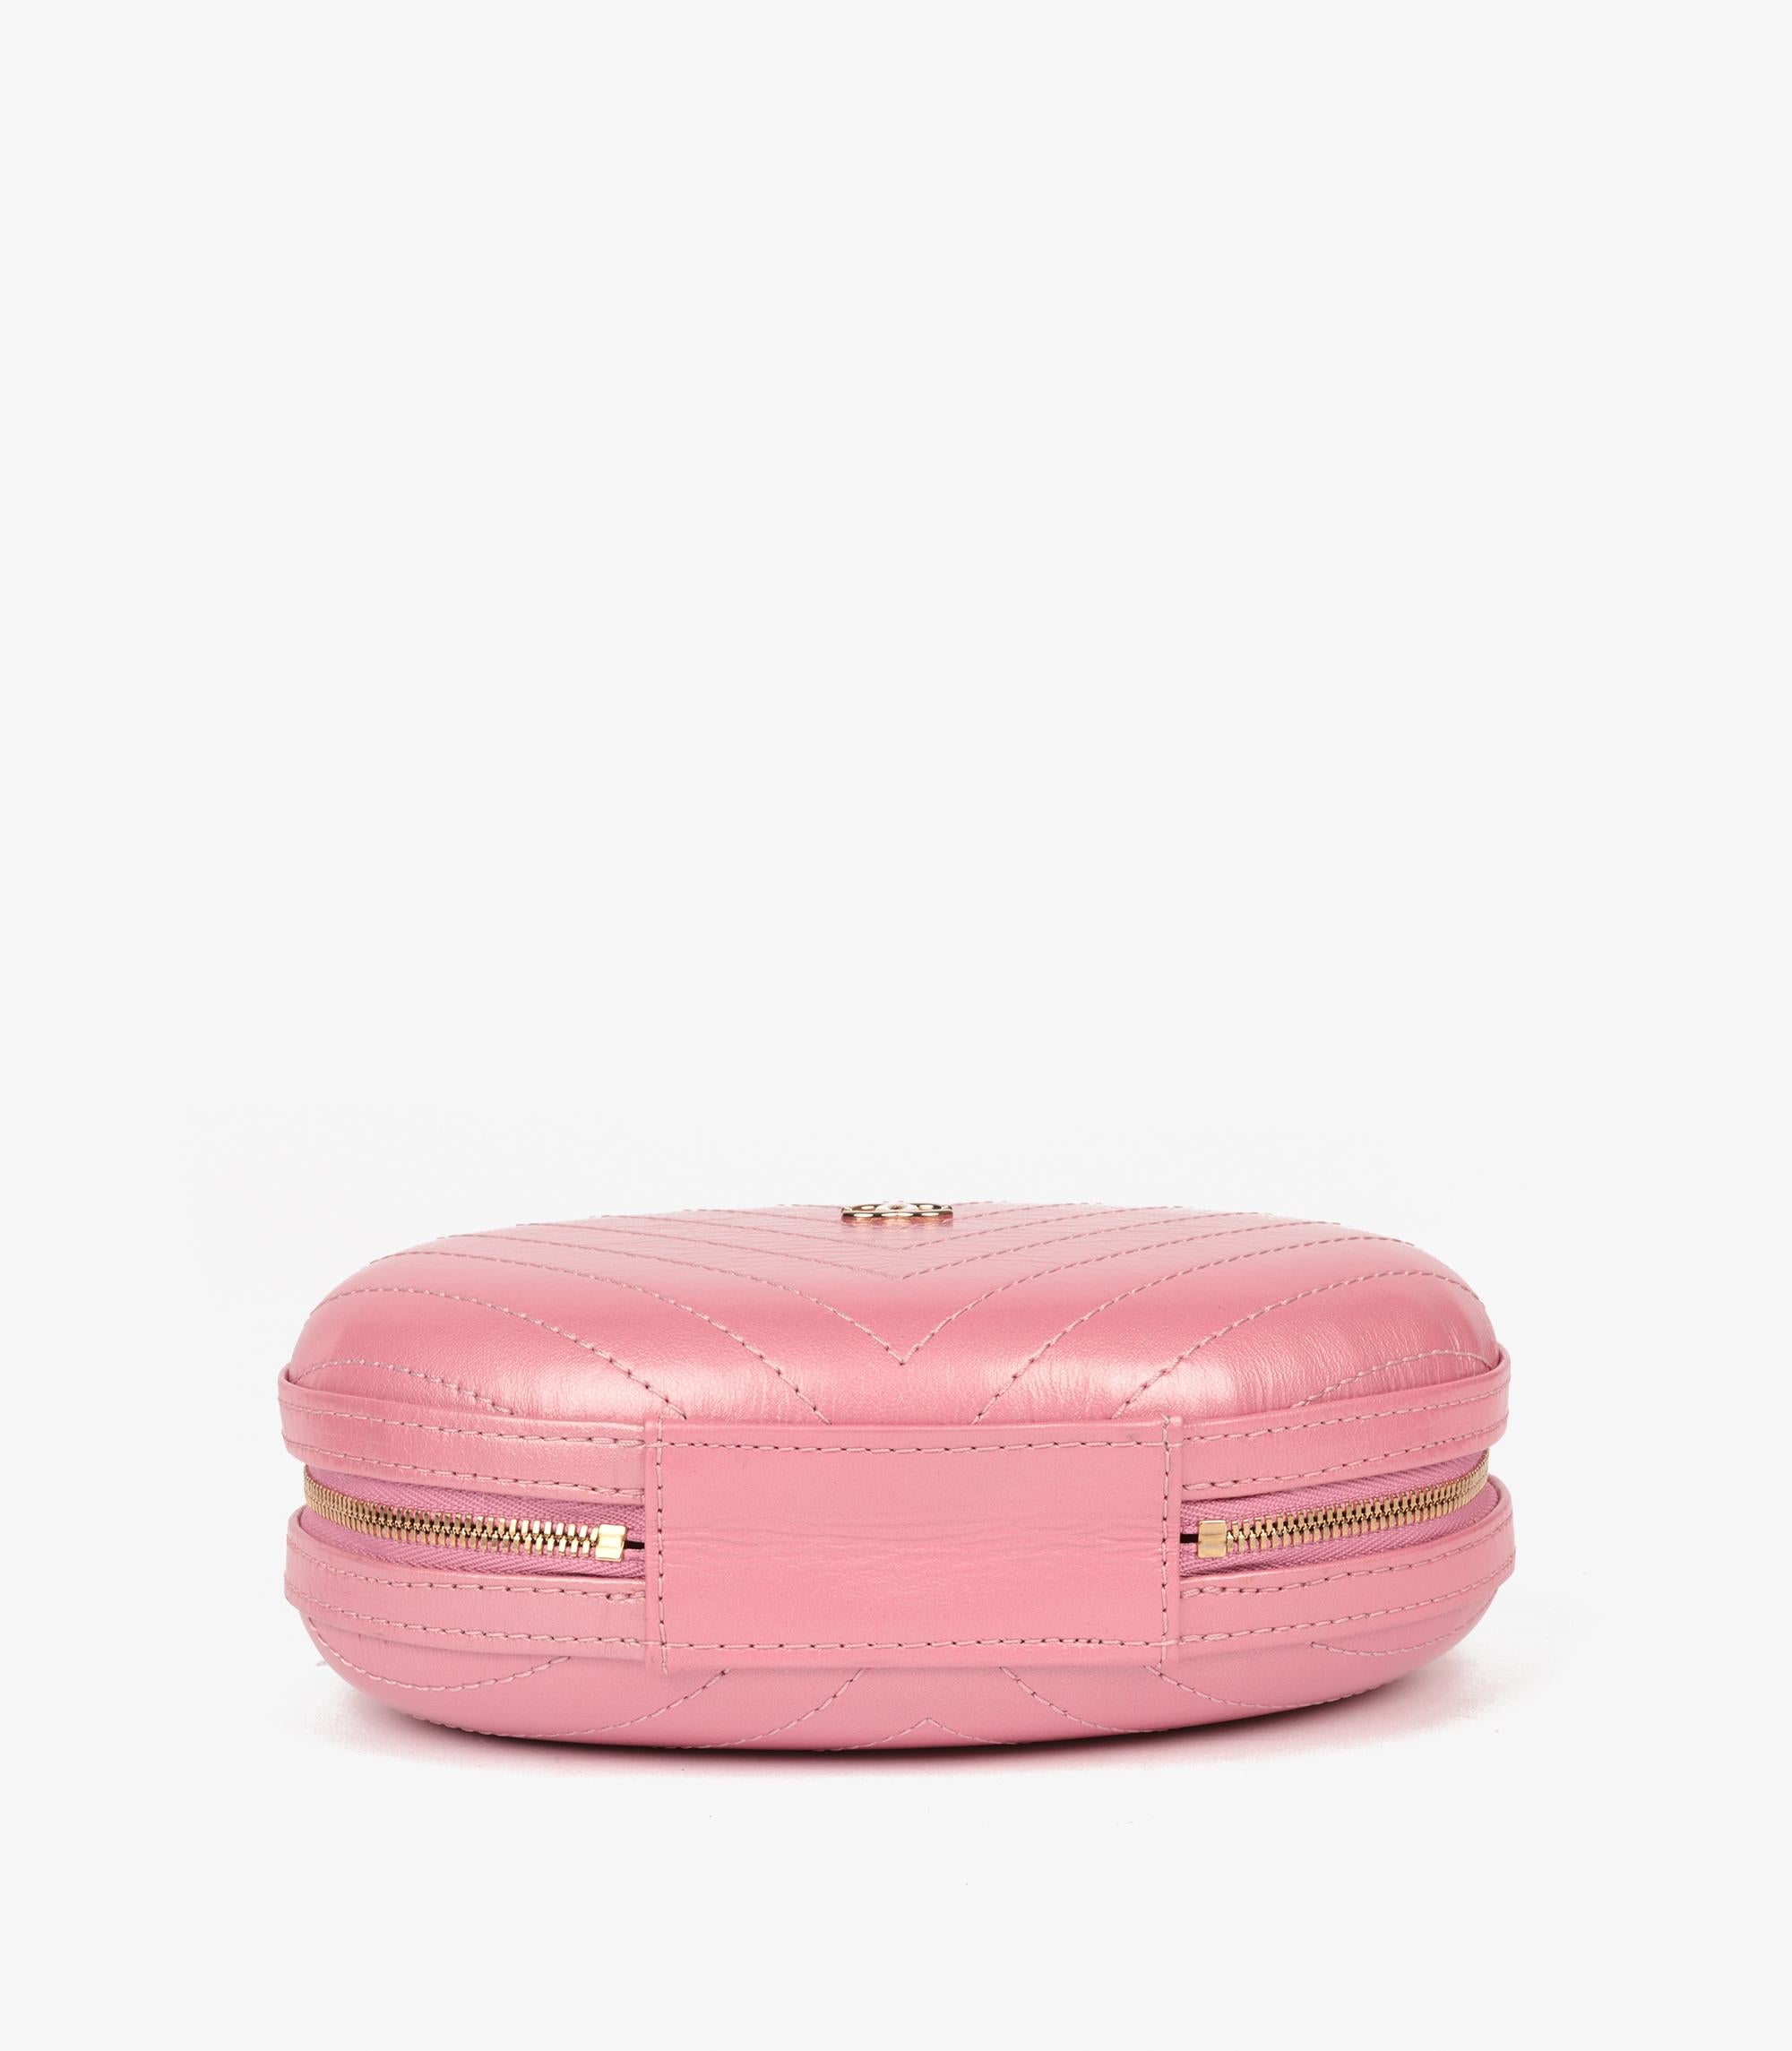 Chanel Pink Chevron Quilted Shiny Calfskin Leather La Pausa Classic Evening Bag For Sale 4